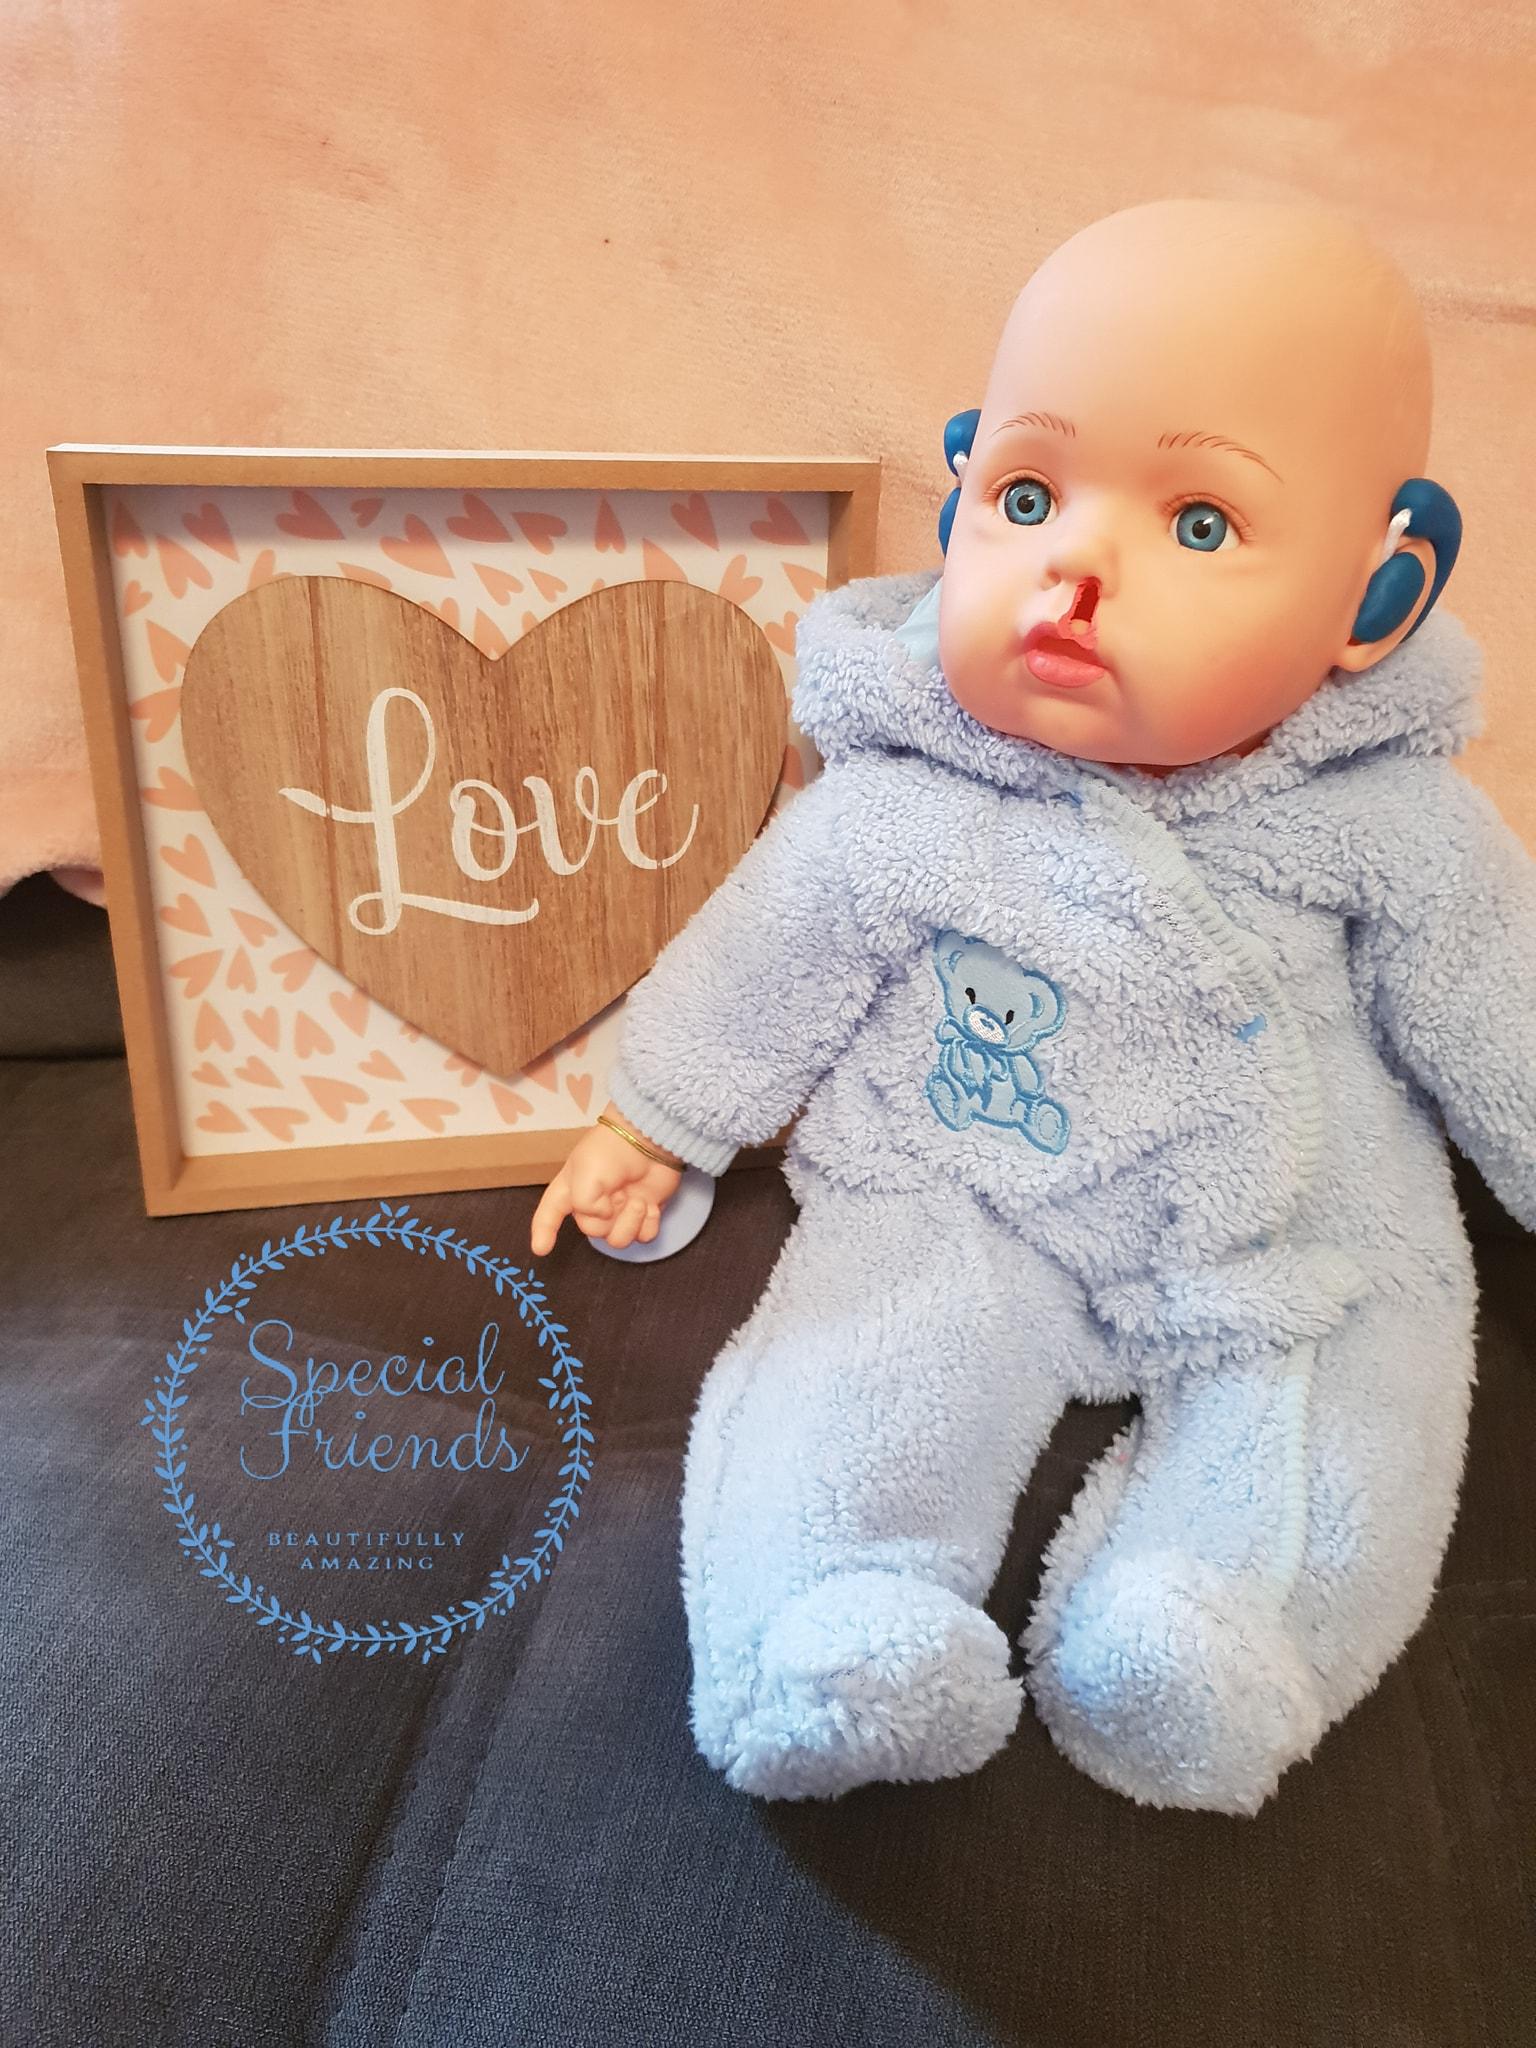 A Special Friends doll with a cleft lip and hearing aids.